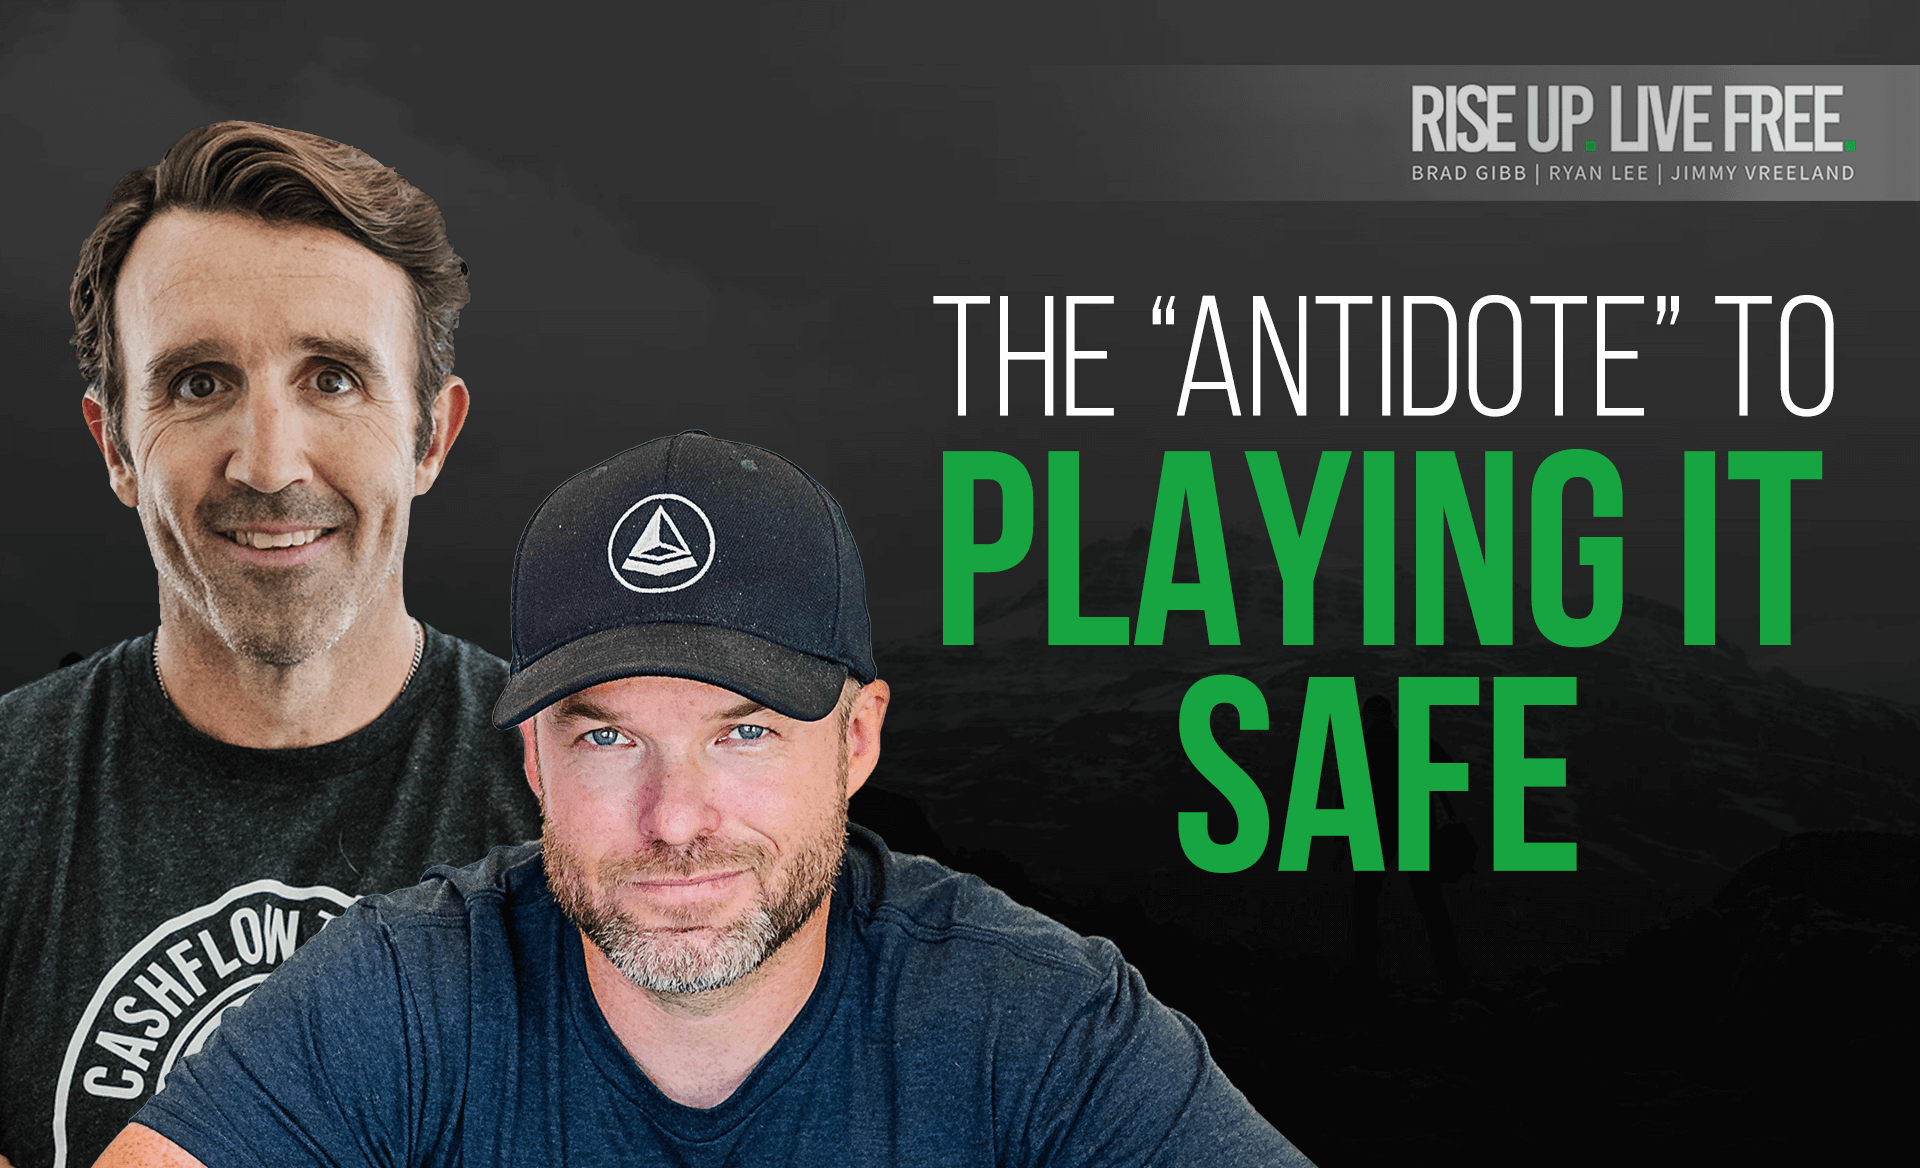 The antidote to playing it safe